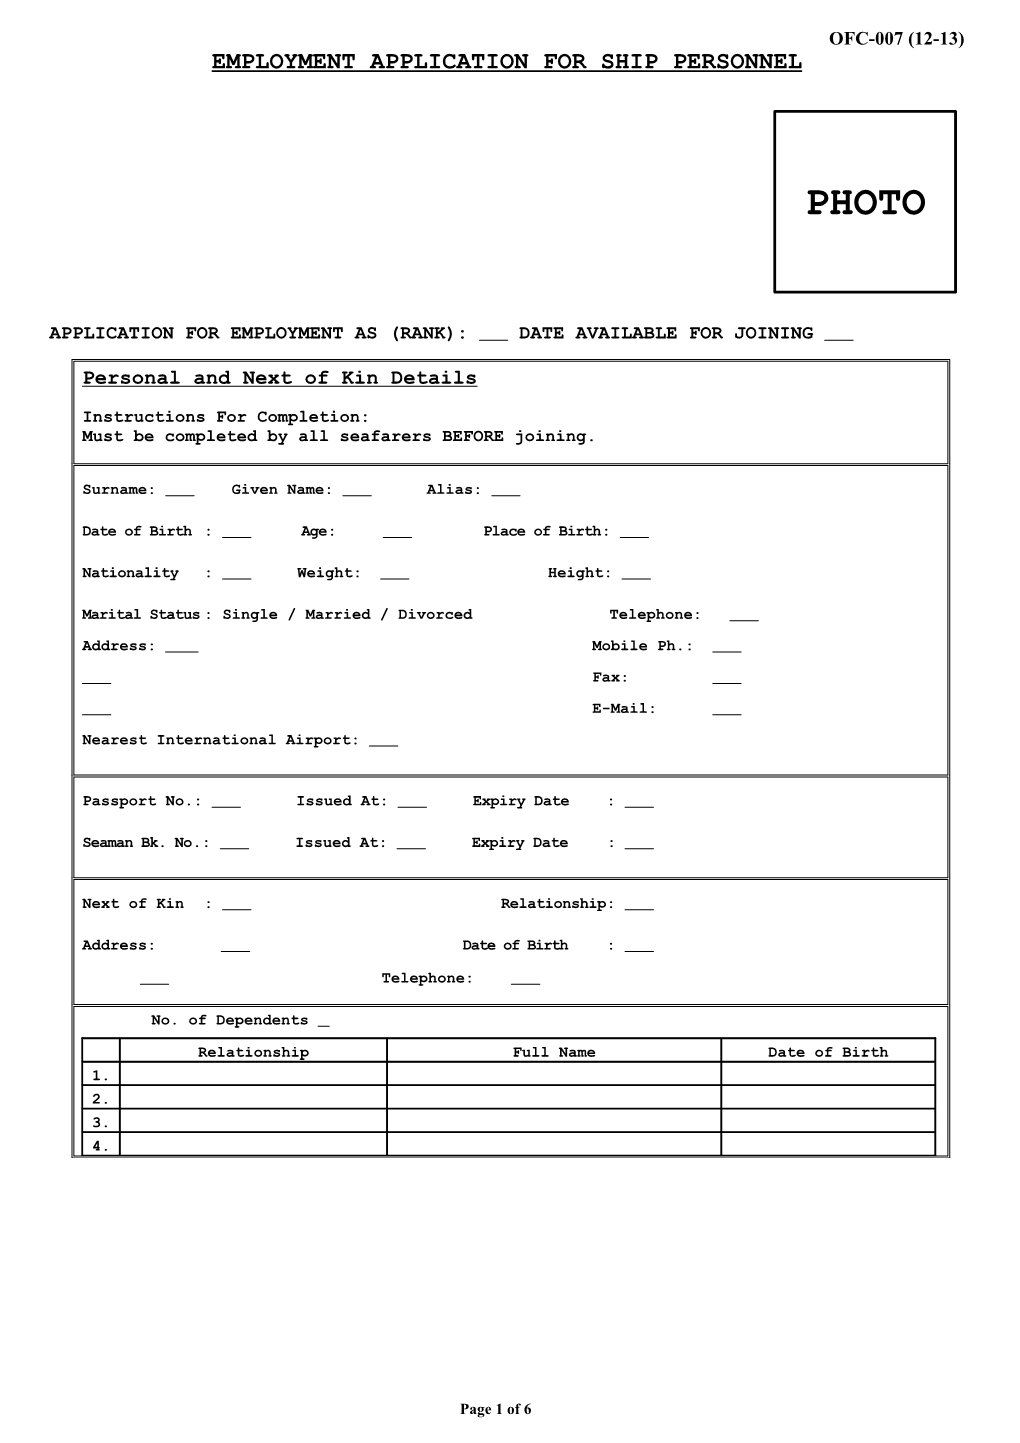 Employment Application for Ship Personnel